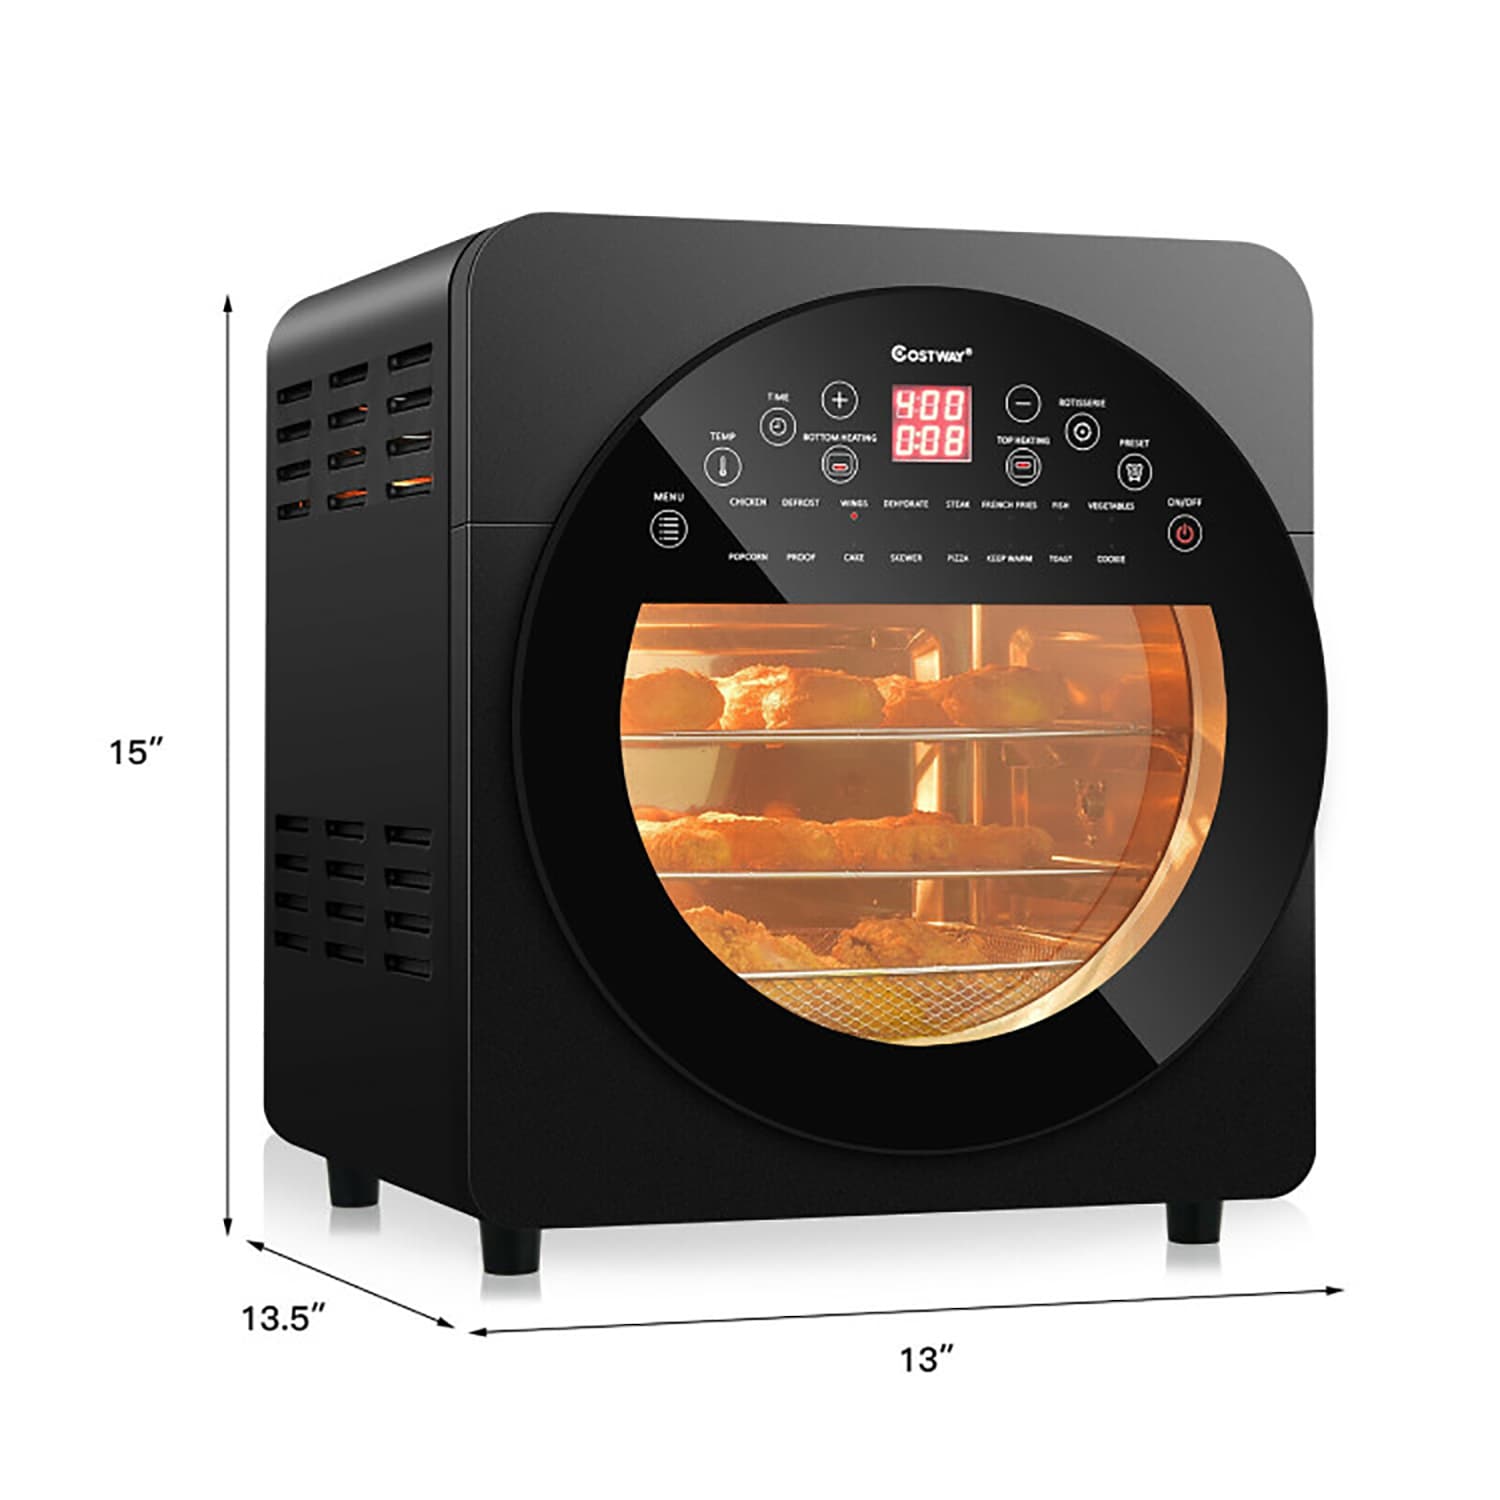 TO4314SSD 9-slice Rotisserie Convection Oven